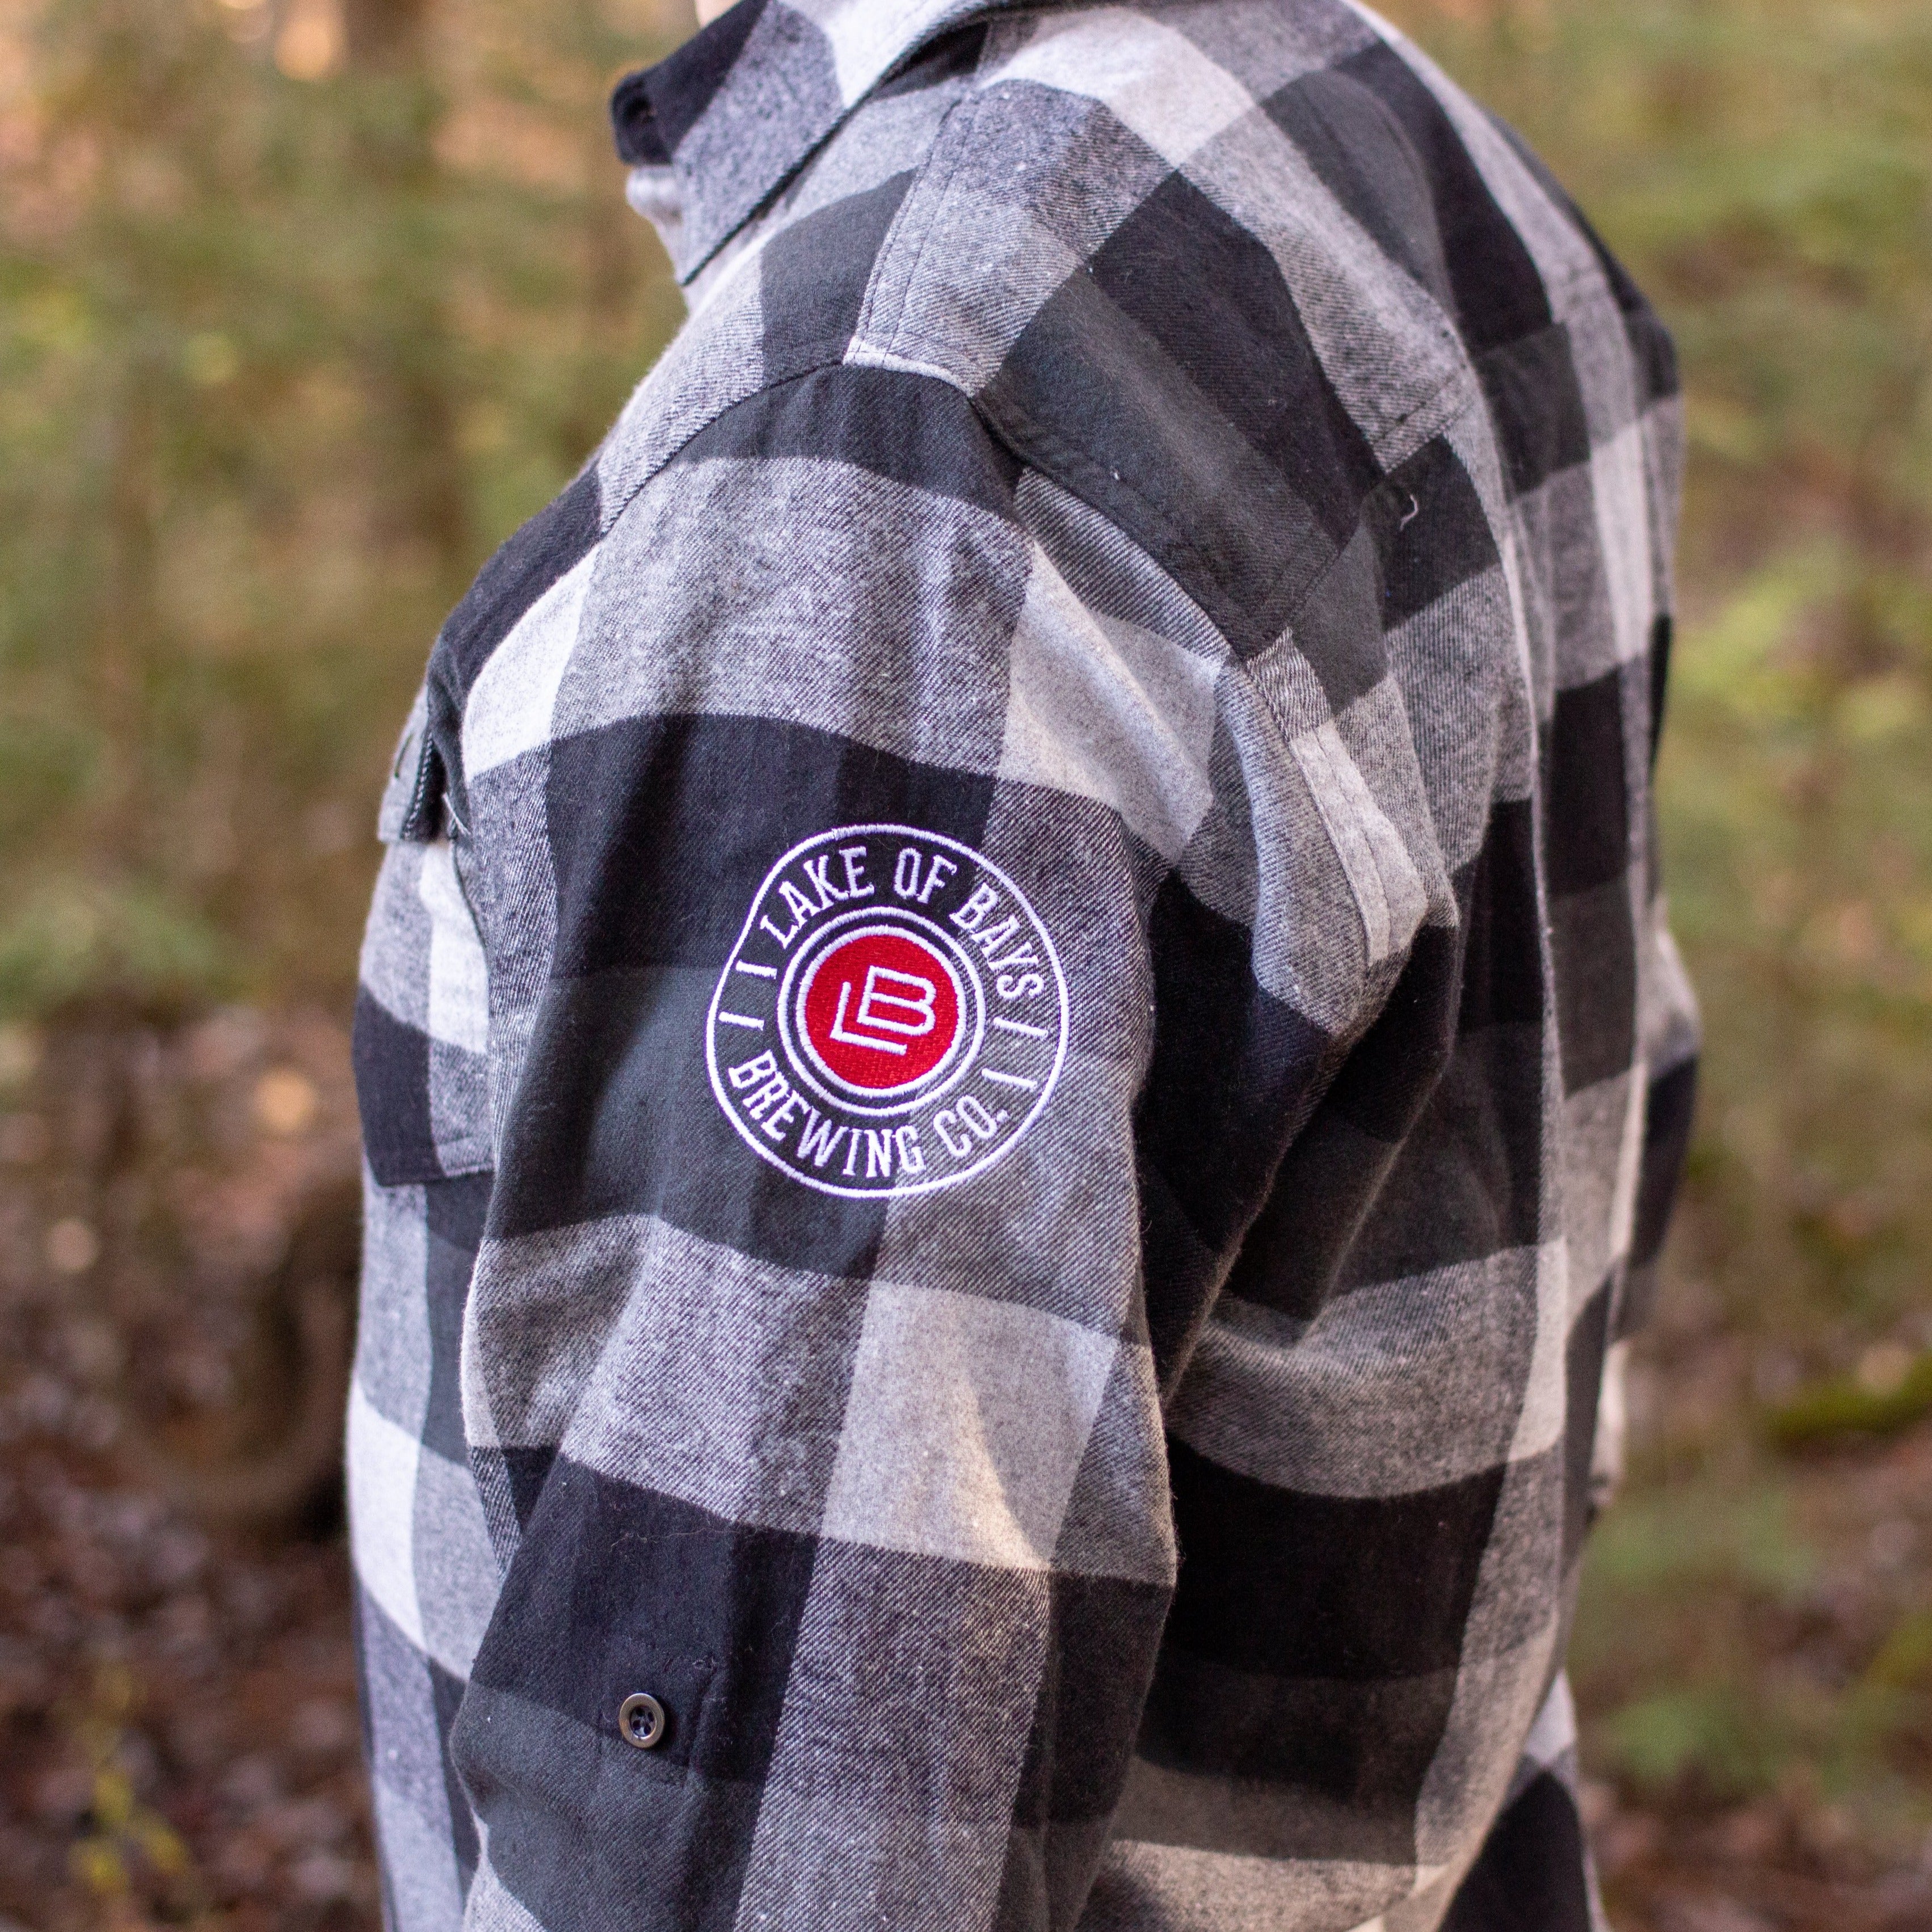 Lake of Bays Brewery Flannel